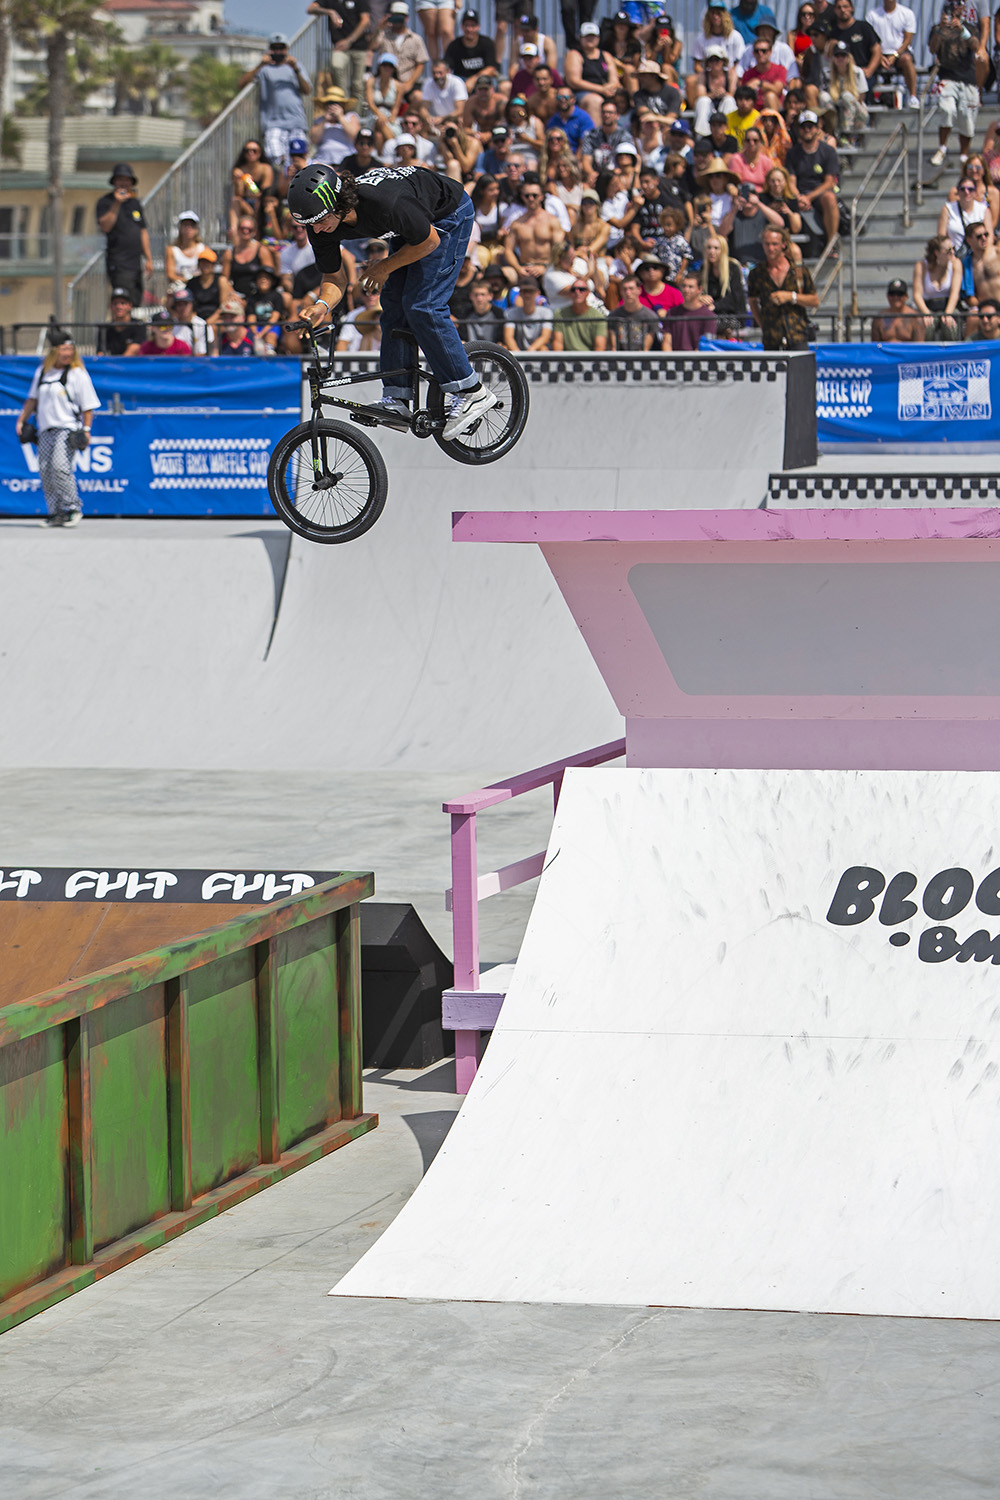 Monster Energy's Kevin Peraza Takes First Place at the Vans Waffle Cup during the Vans US Open